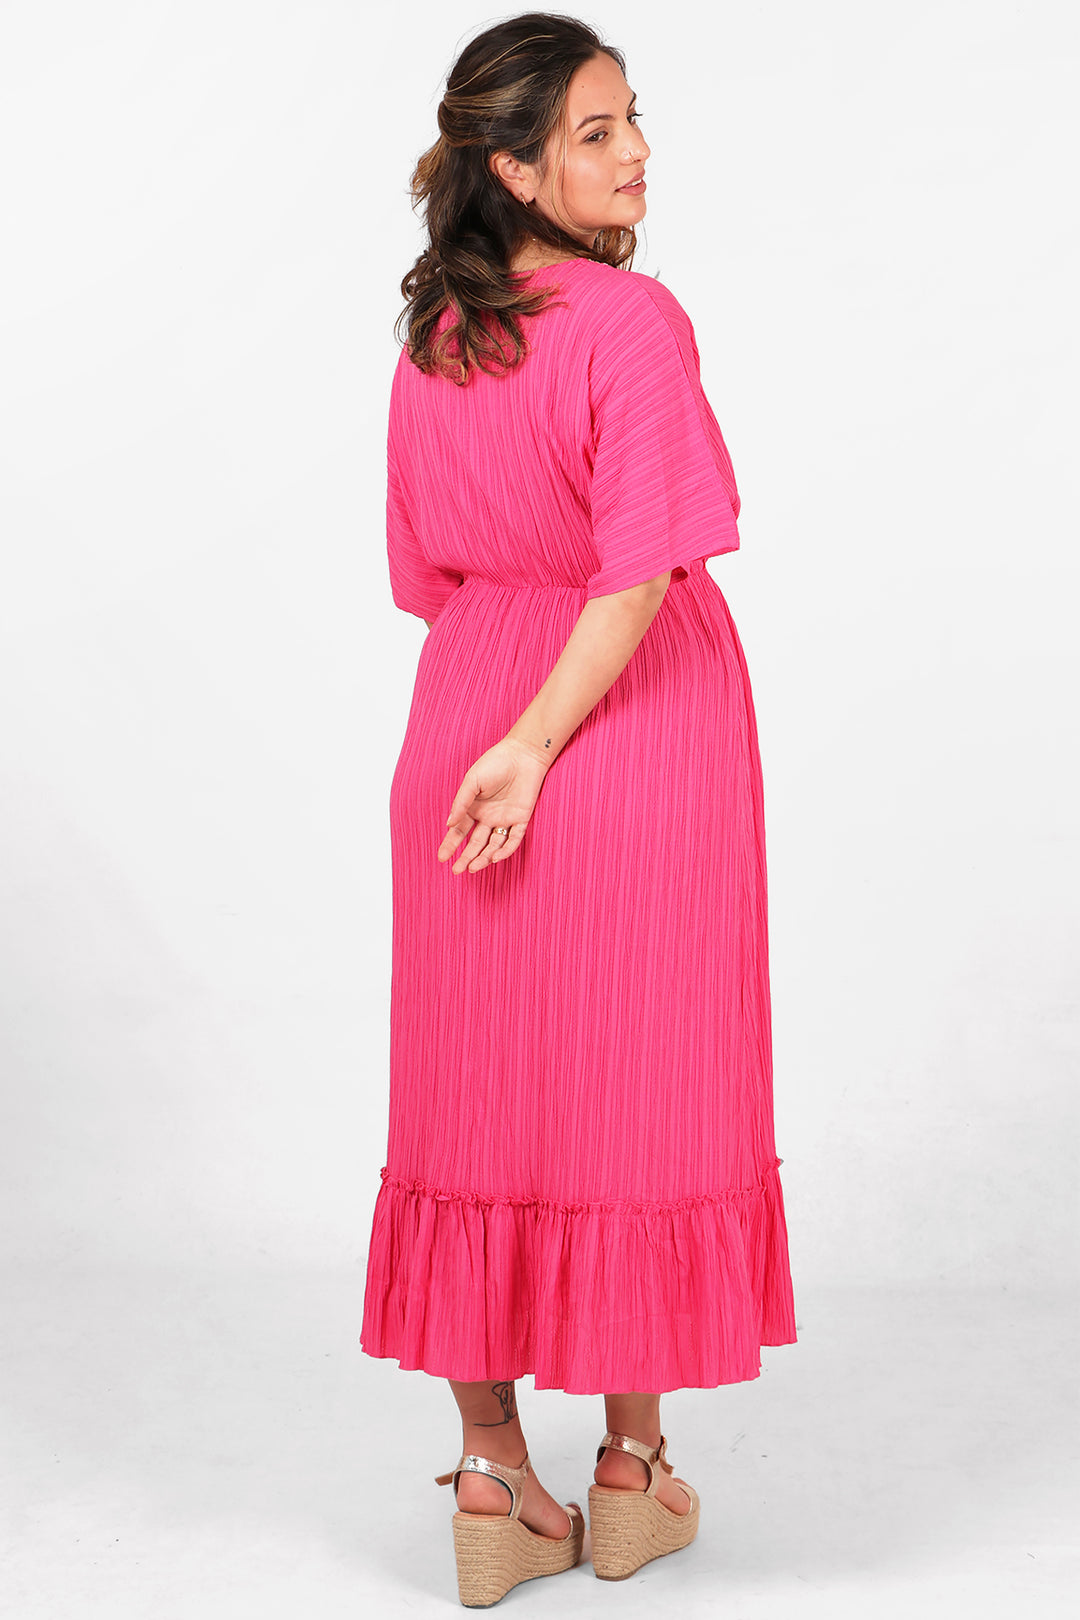 model showing the back of the midi dress, showing an all over pink colour with textured fabric